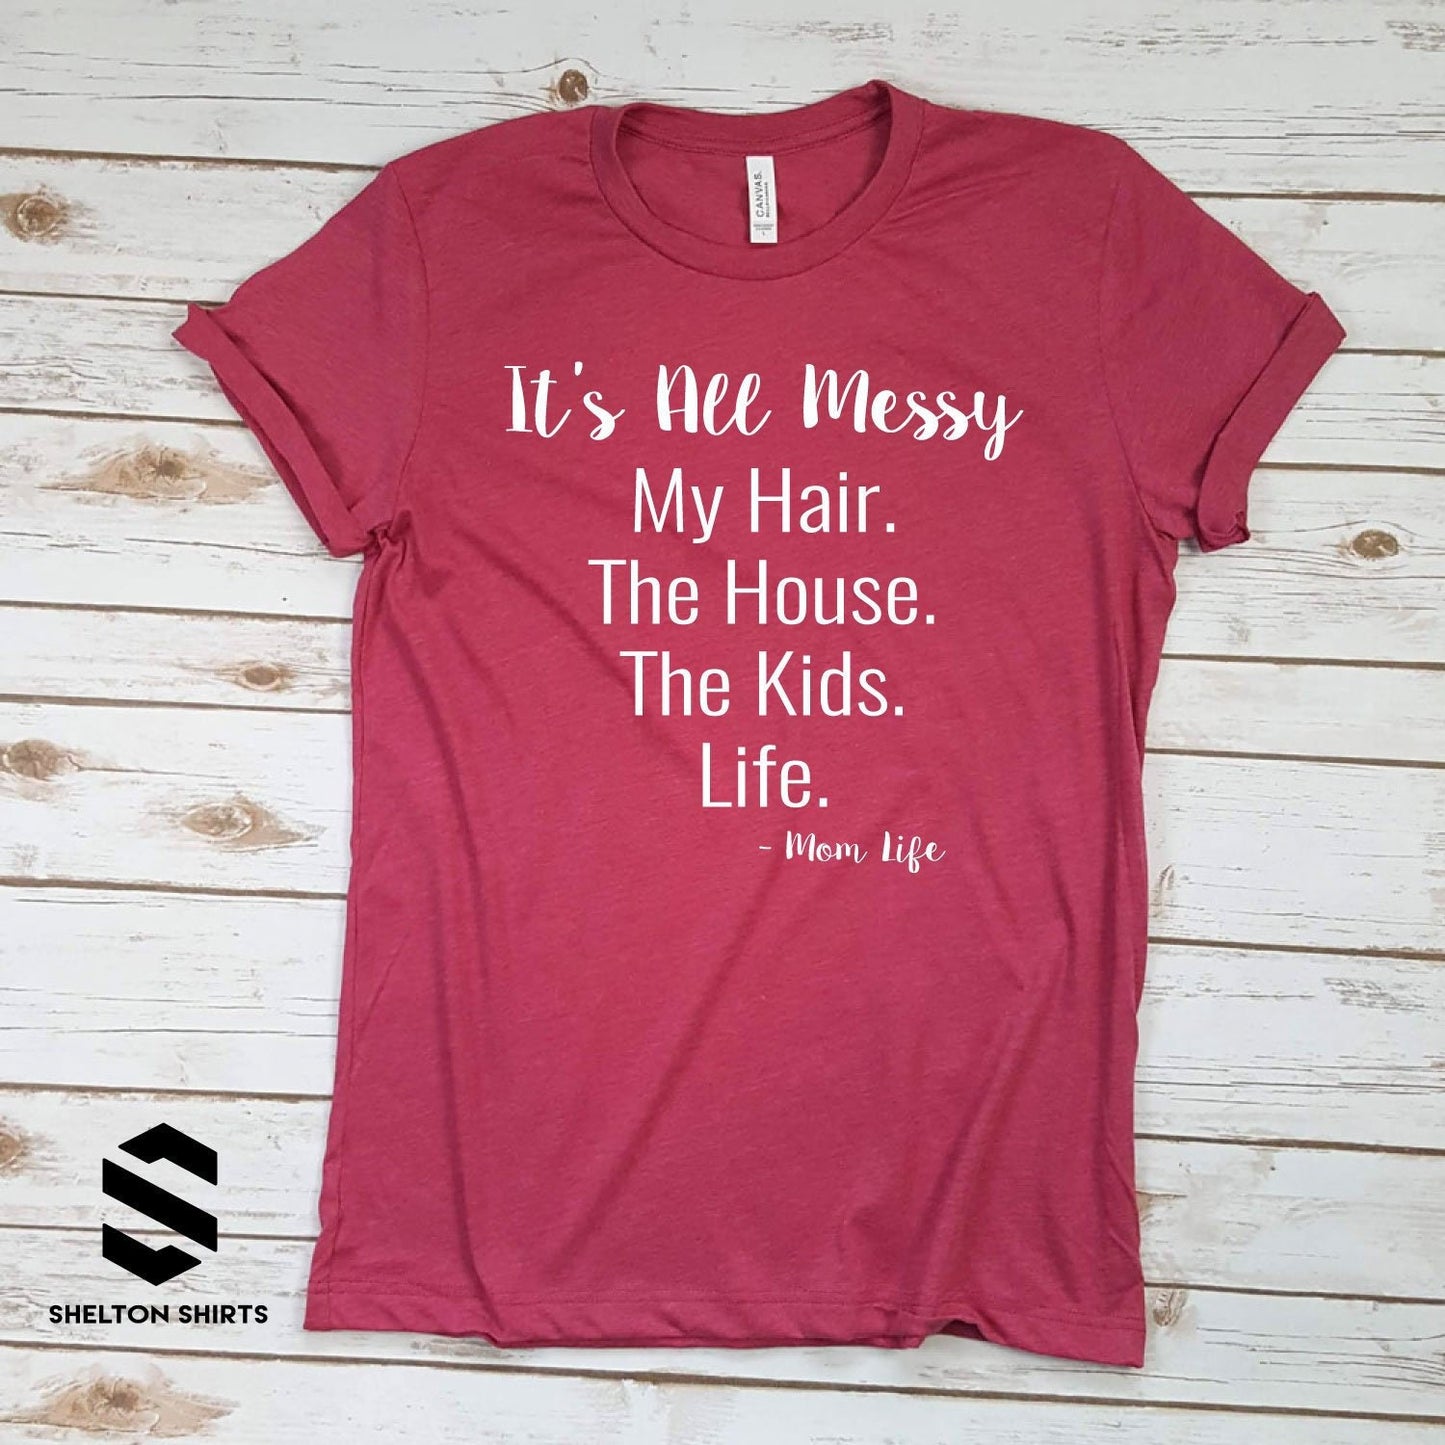 It's All Messy Super Soft Heather Raspberry Cotton Comfy T-Shirt